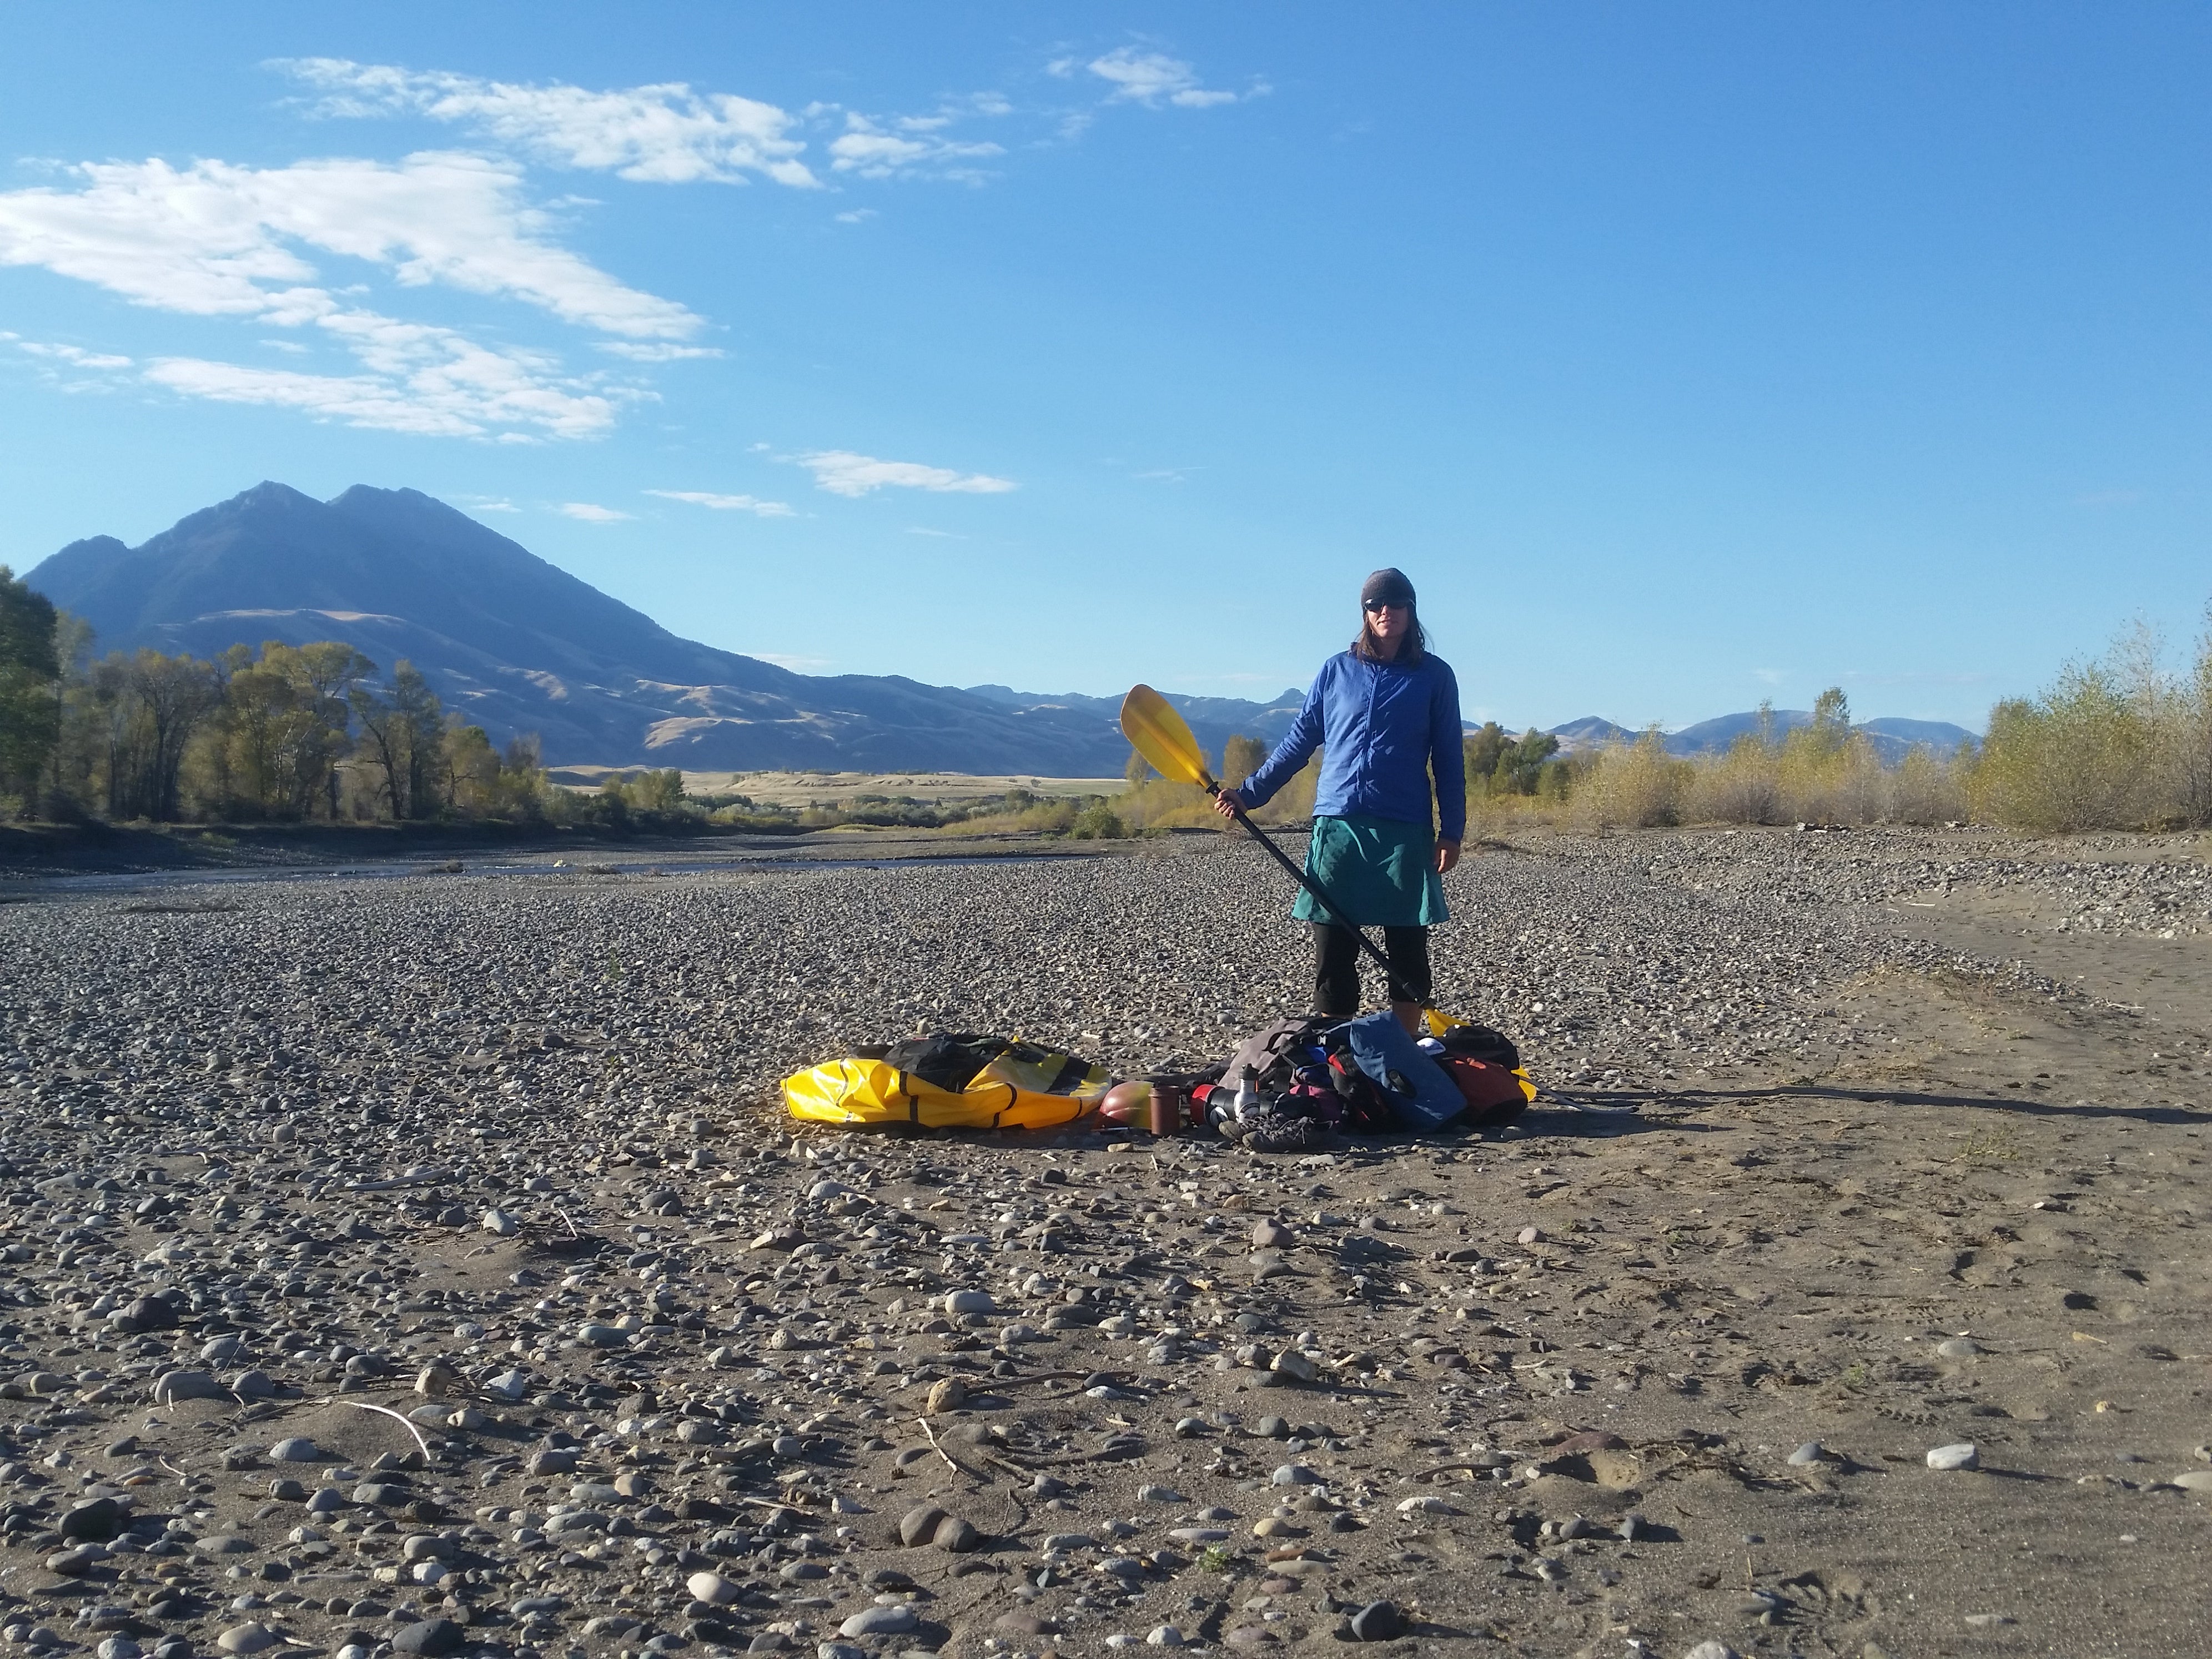 Packrafting: Rivers are Trails Too By Renee “She-ra” Patrick